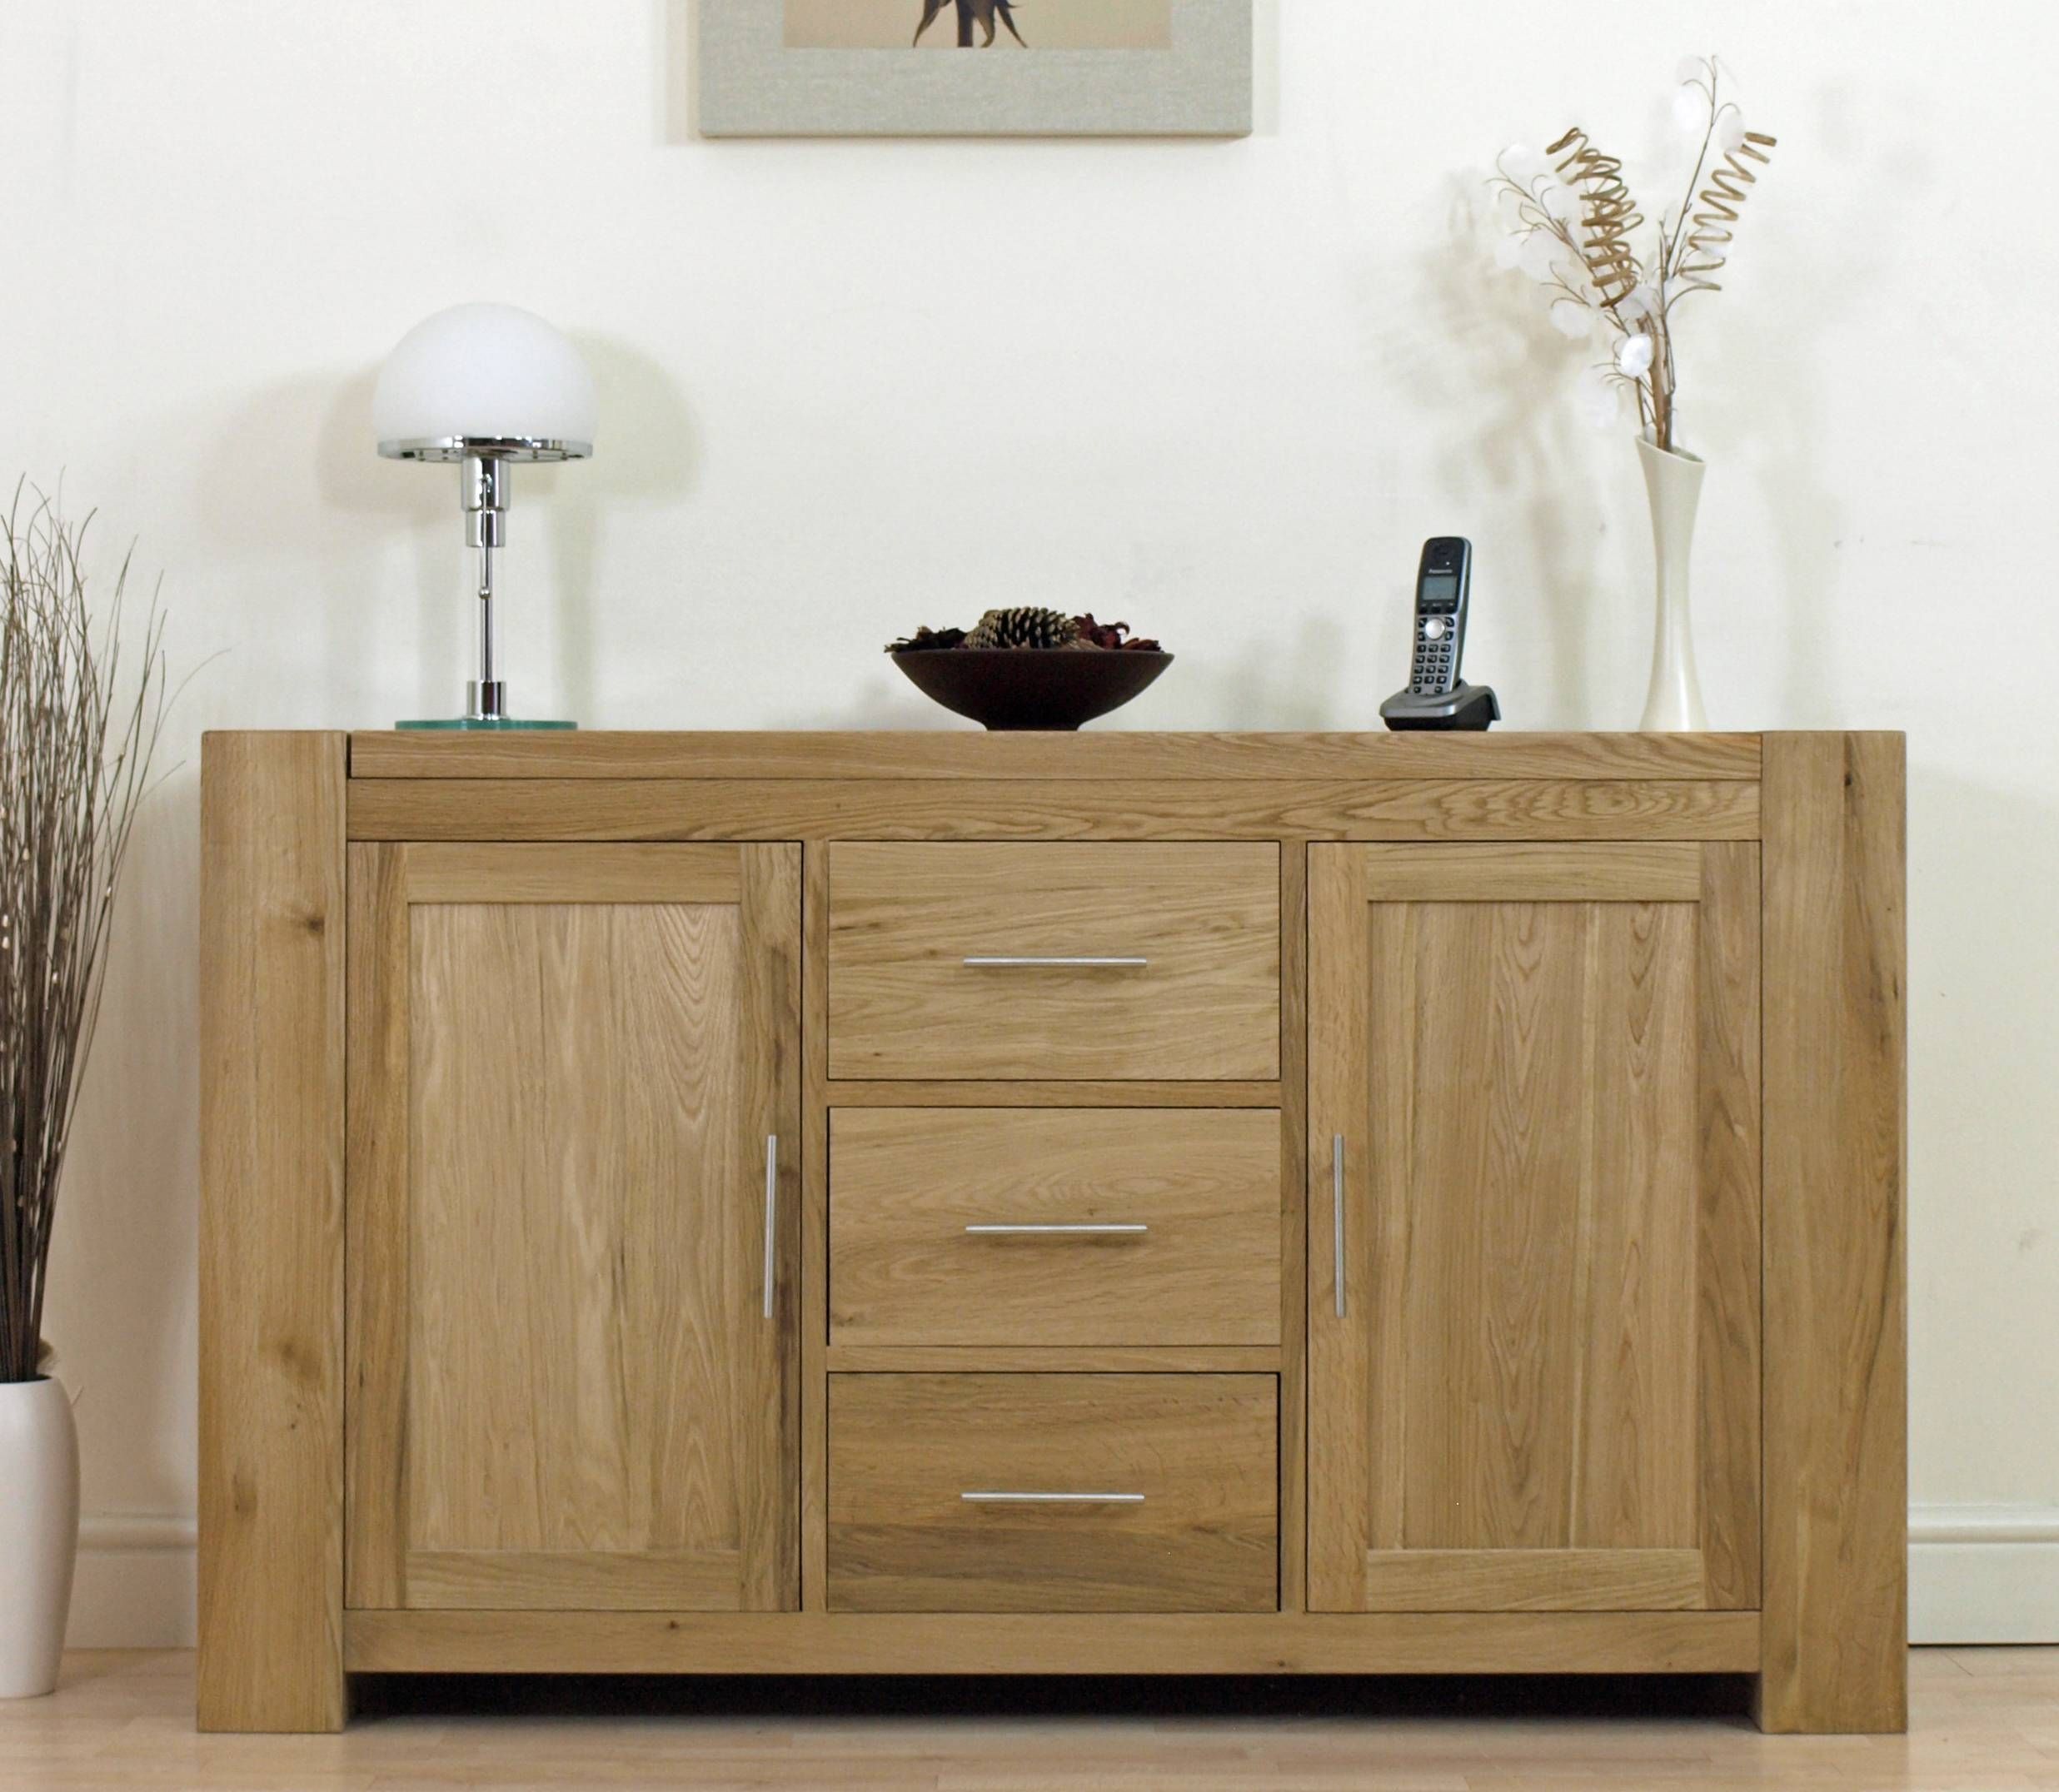 Solid Oak Sideboard Is Your First Choice Living Room Furniture – Hgnv With Recent Wooden Sideboard Furniture (View 4 of 15)